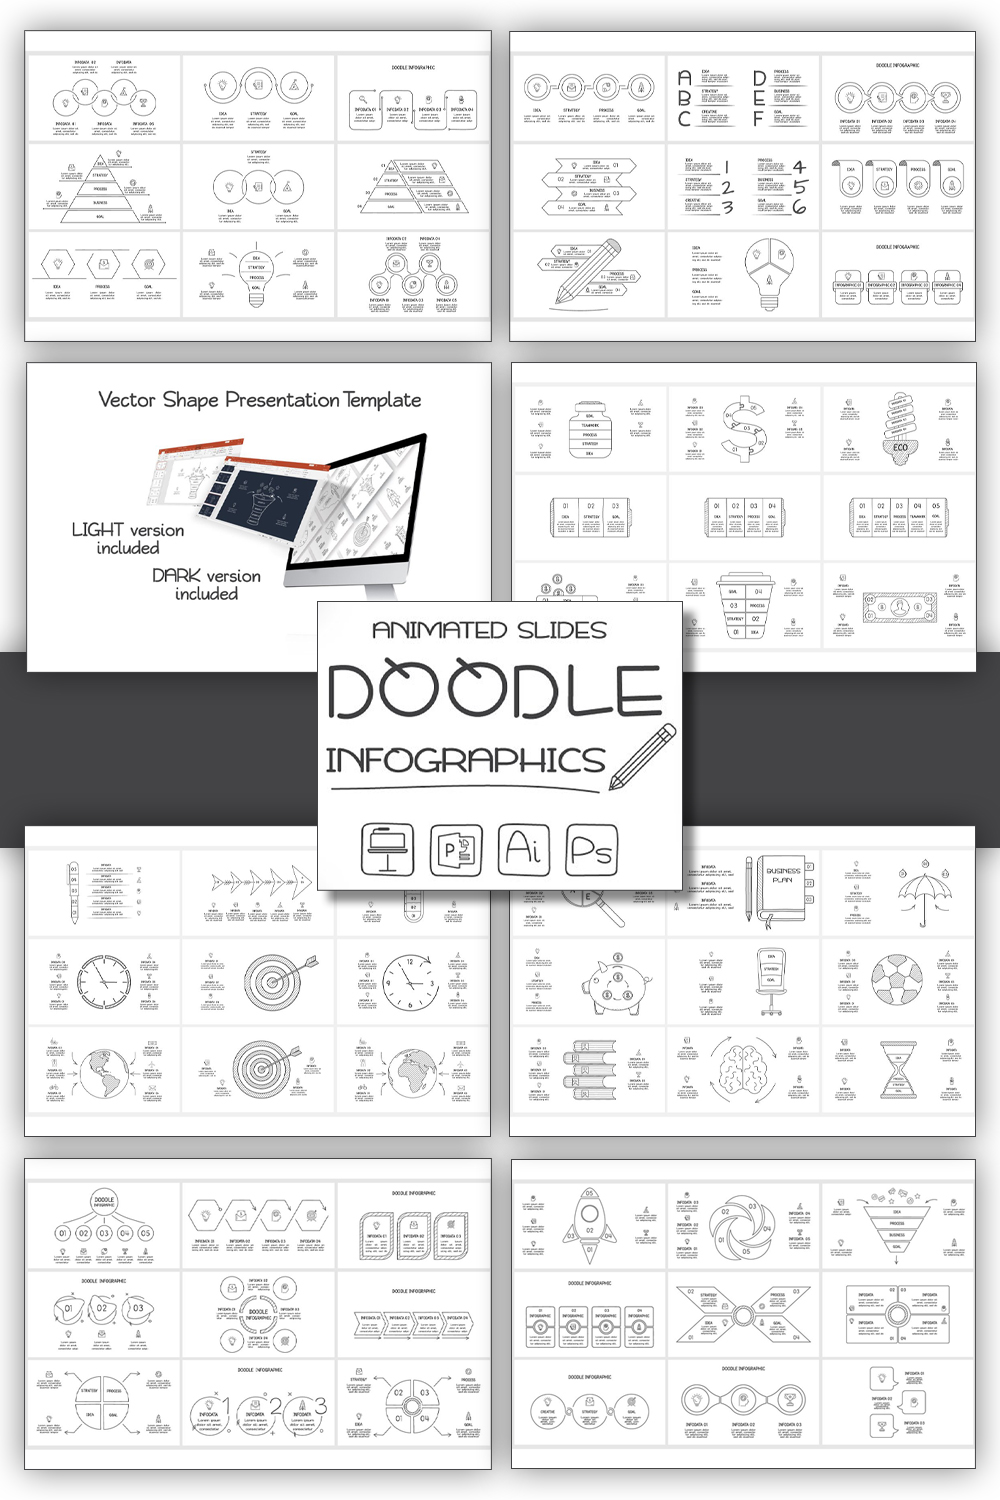 Doodle animated infographics of pinterest.